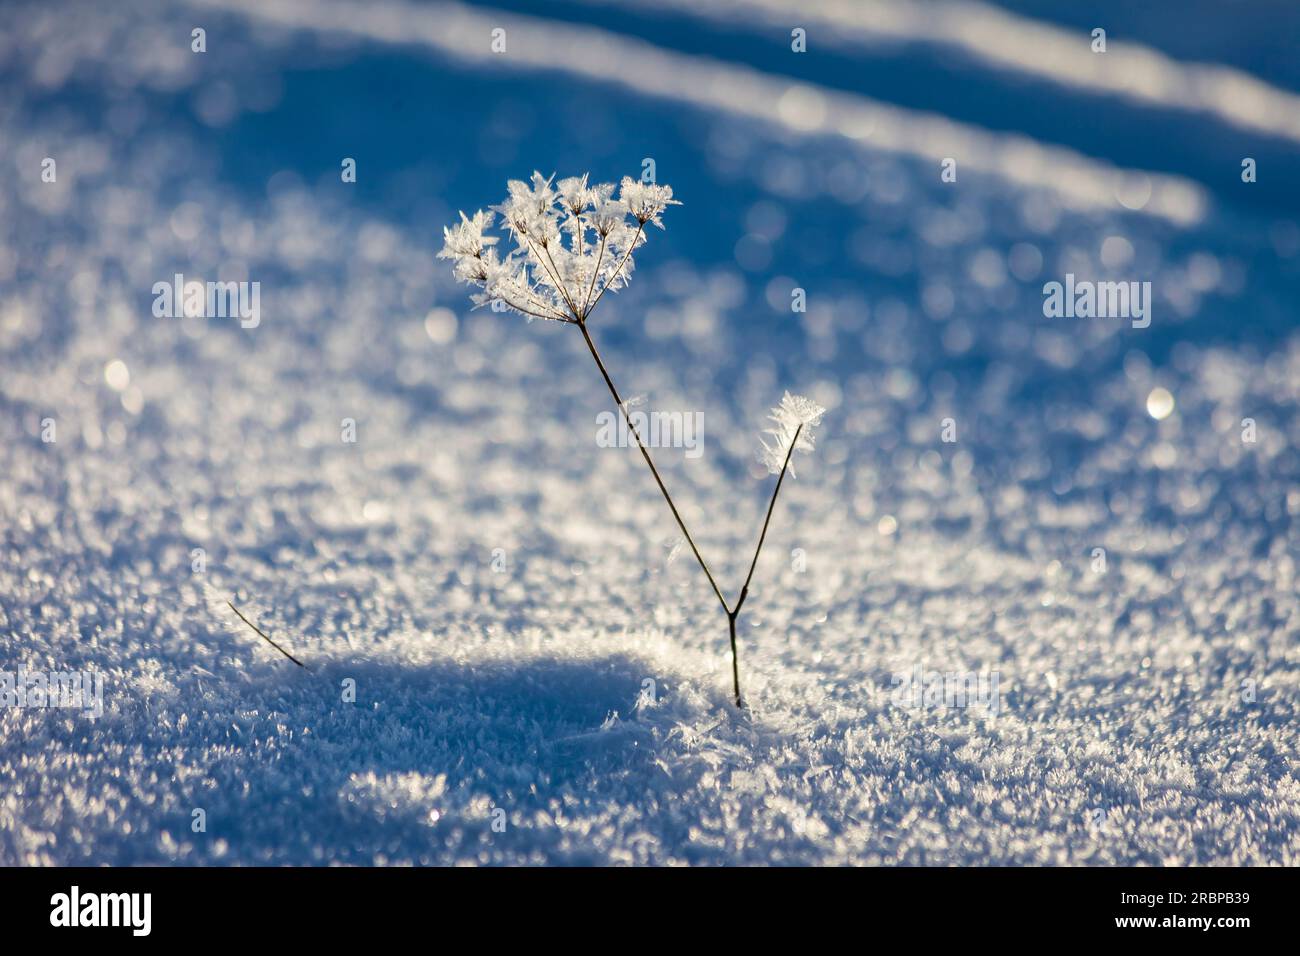 Blade of grass with hoarfrost, Niedernhausen, Hesse, Germany Stock Photo